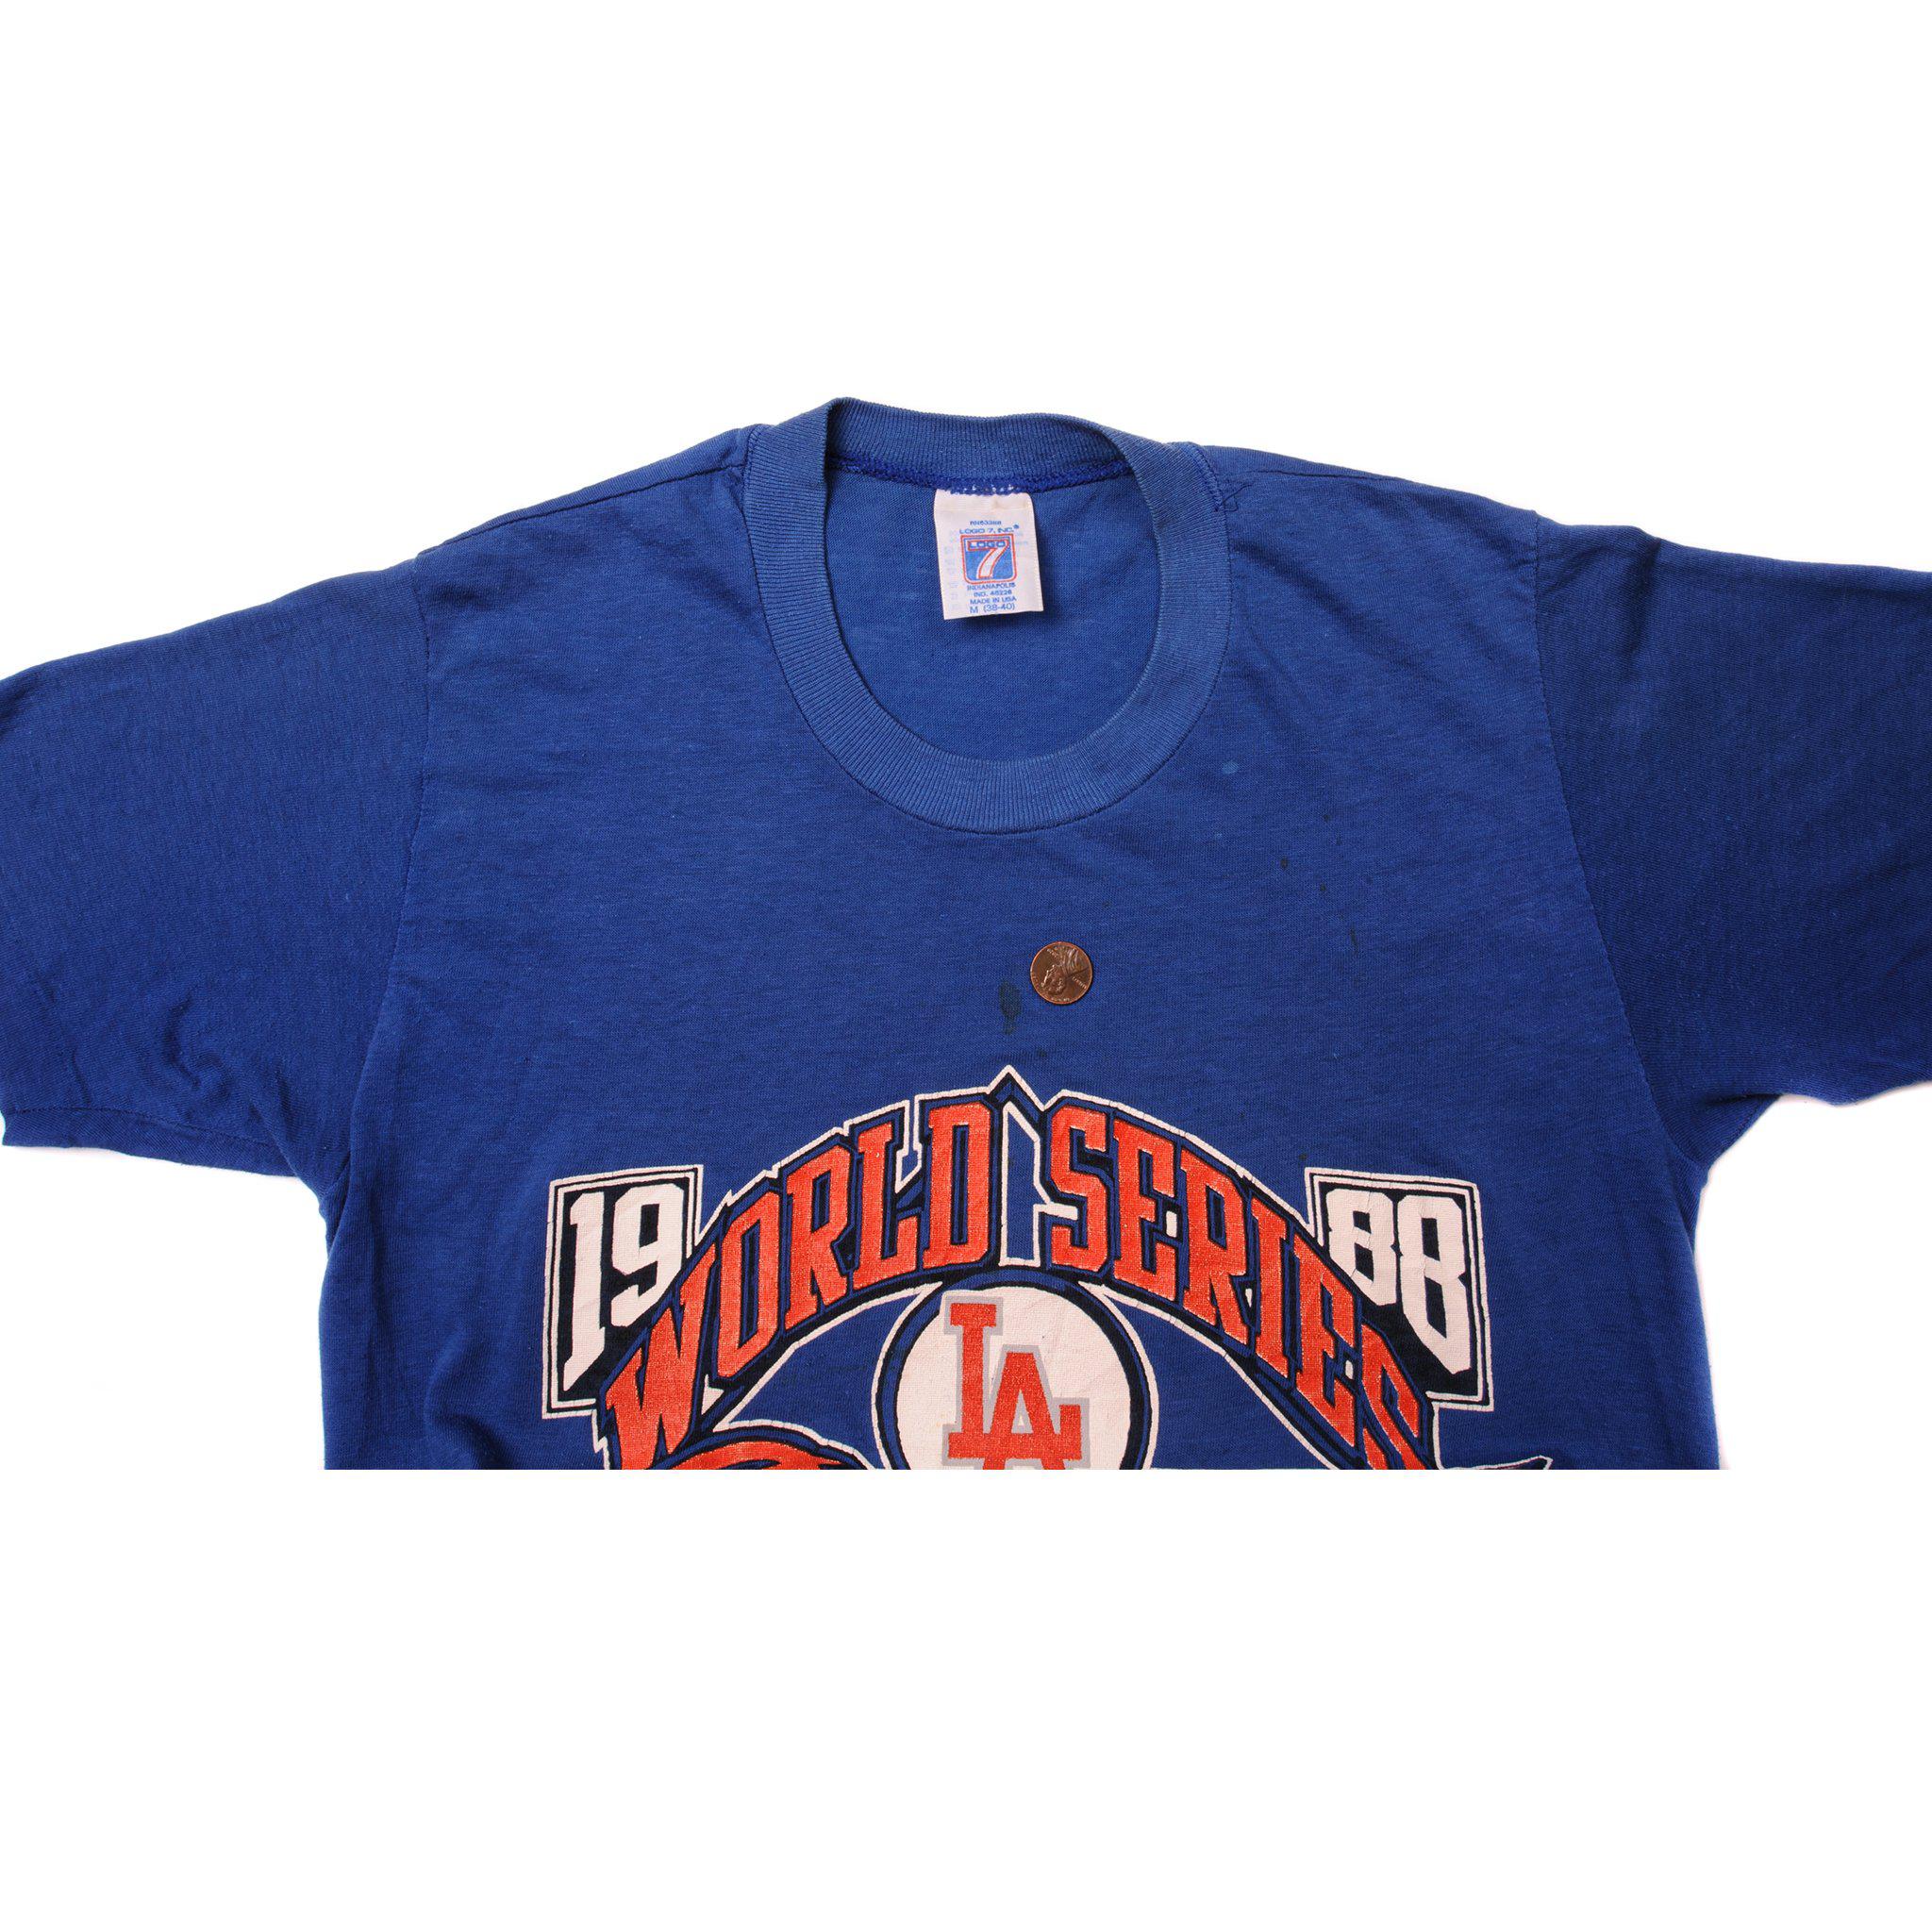 Vintage Los Angeles Dodgers 1988 World Series T Shirt Tee Made